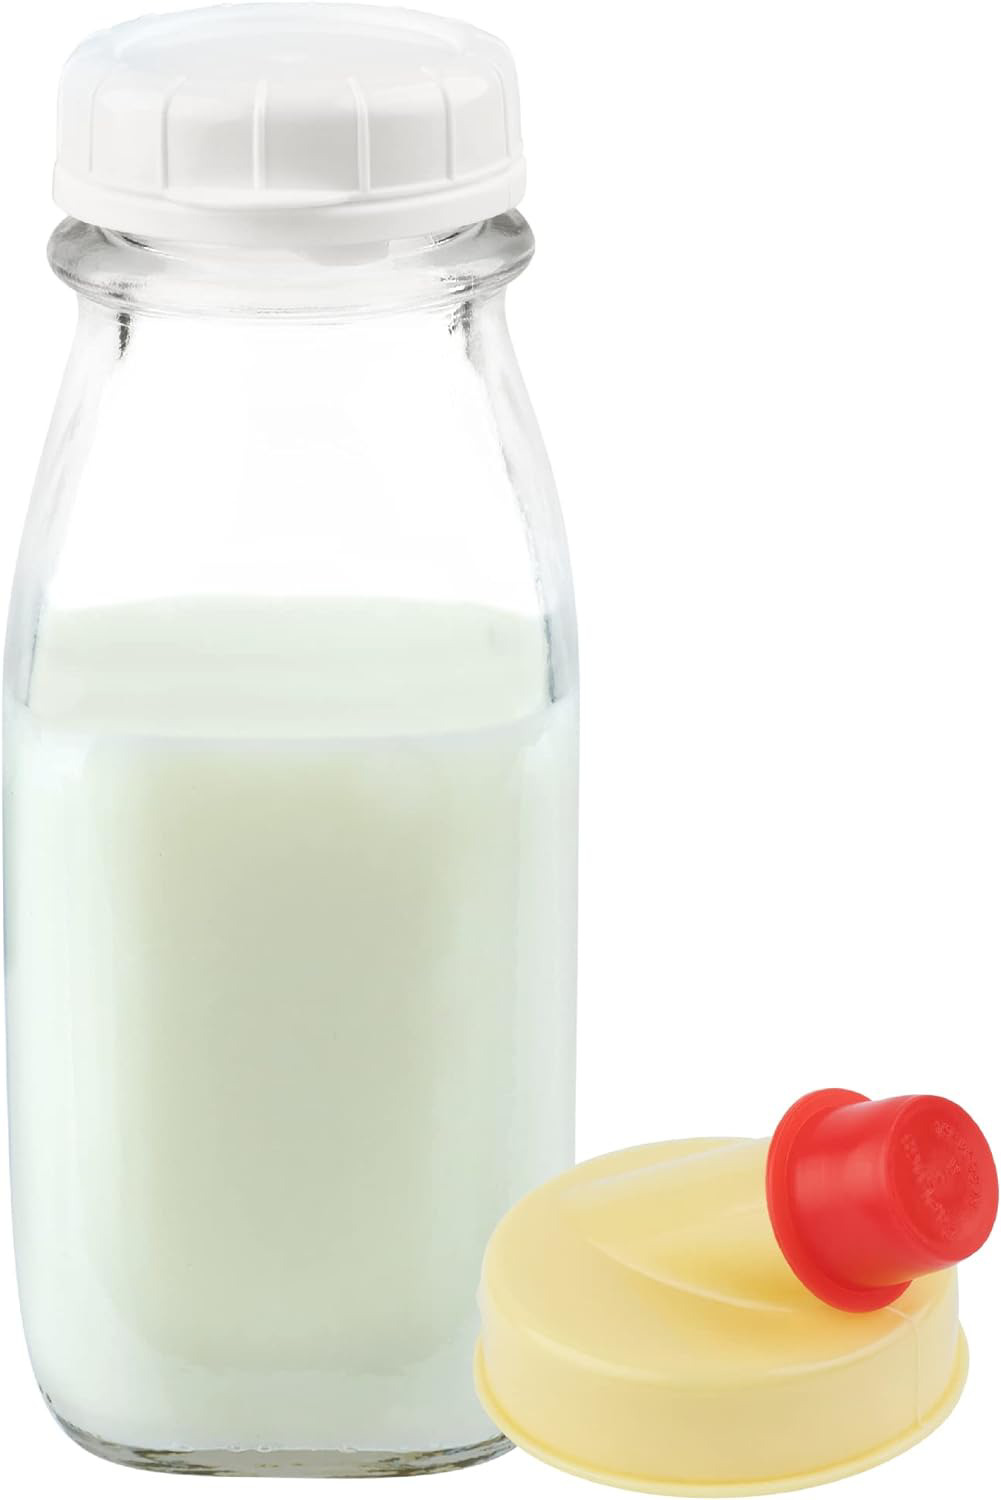 Kitchentoolz 12 Oz Square Glass Milk Bottle with Lids- Perfect Milk Container -